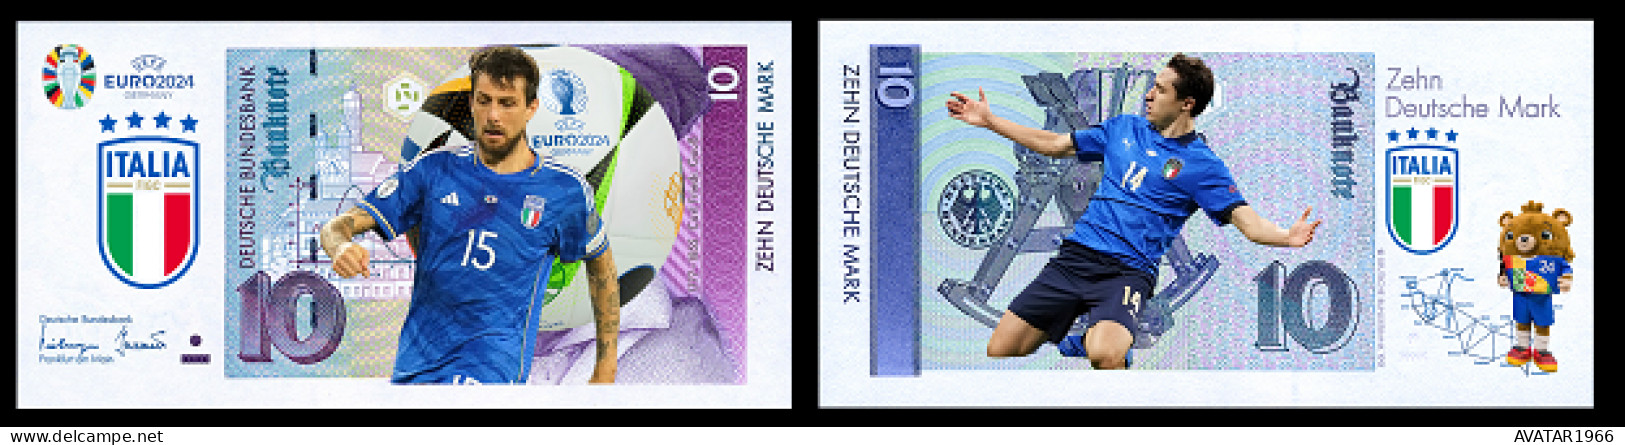 UEFA European Football Championship 2024 Qualified Country  Italy  8 Pieces Germany Fantasy Paper Money - [15] Commemoratives & Special Issues